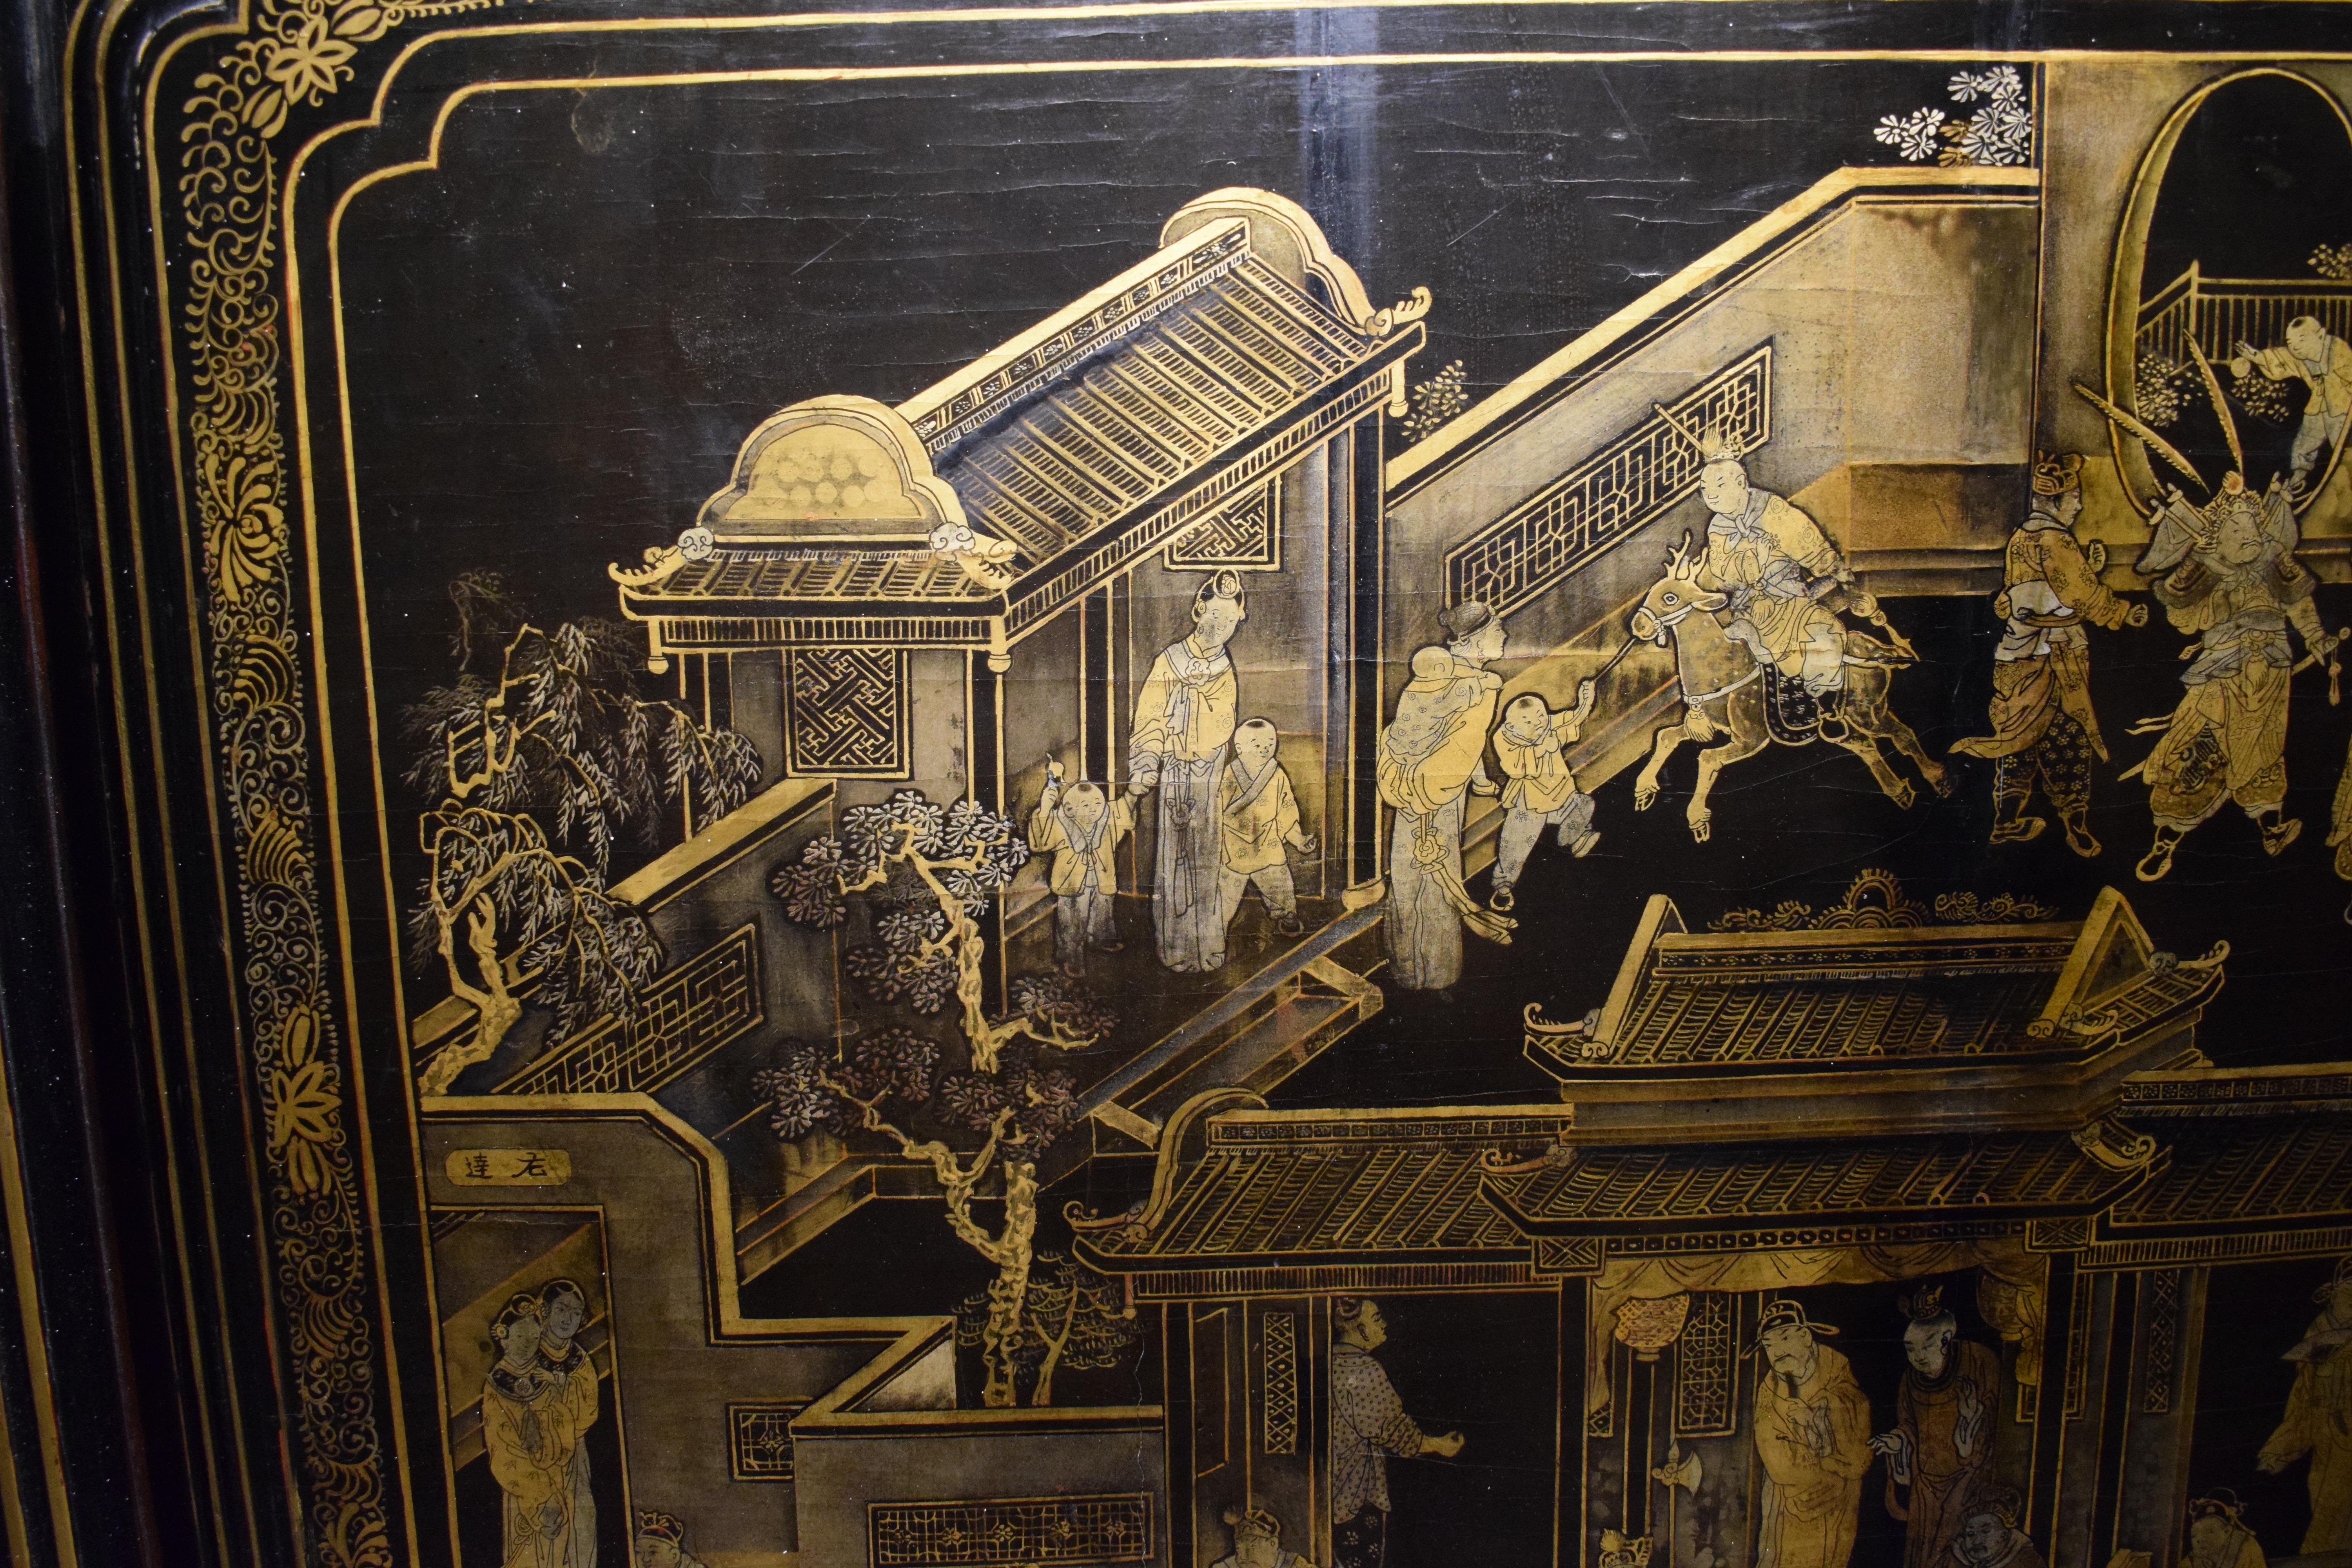 19th Century Chinese Export Gilt-Decorated Black Lacquer Panel